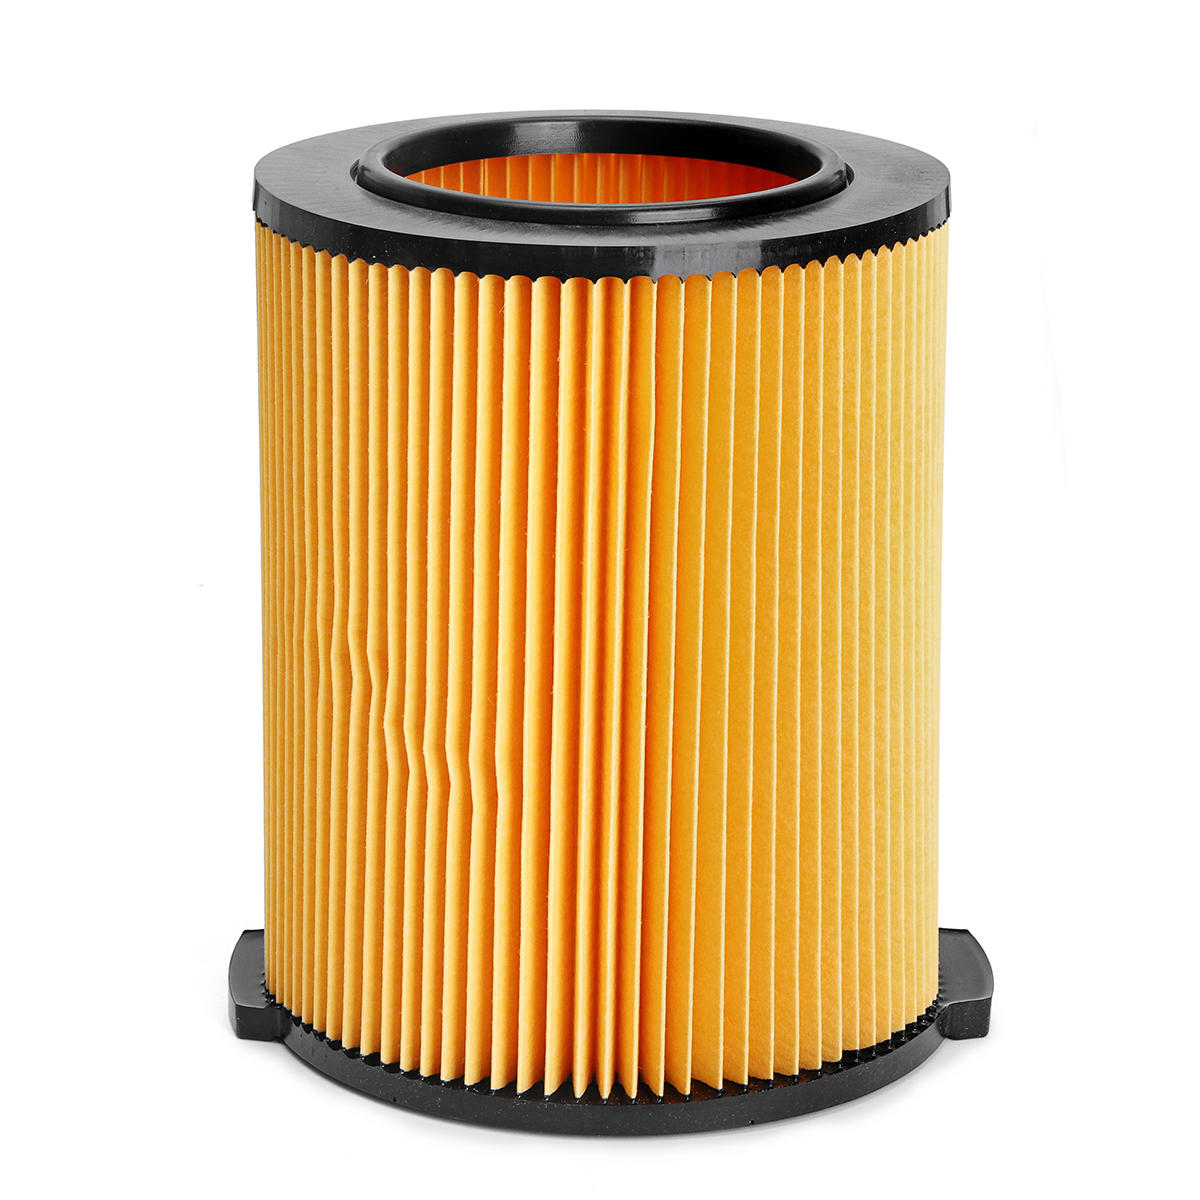 Filter Replacement Vacuum Cleaner Filter For Ridgid VF4000 72947 Fits 6-20 Gallon Wet & Dry Vacuums